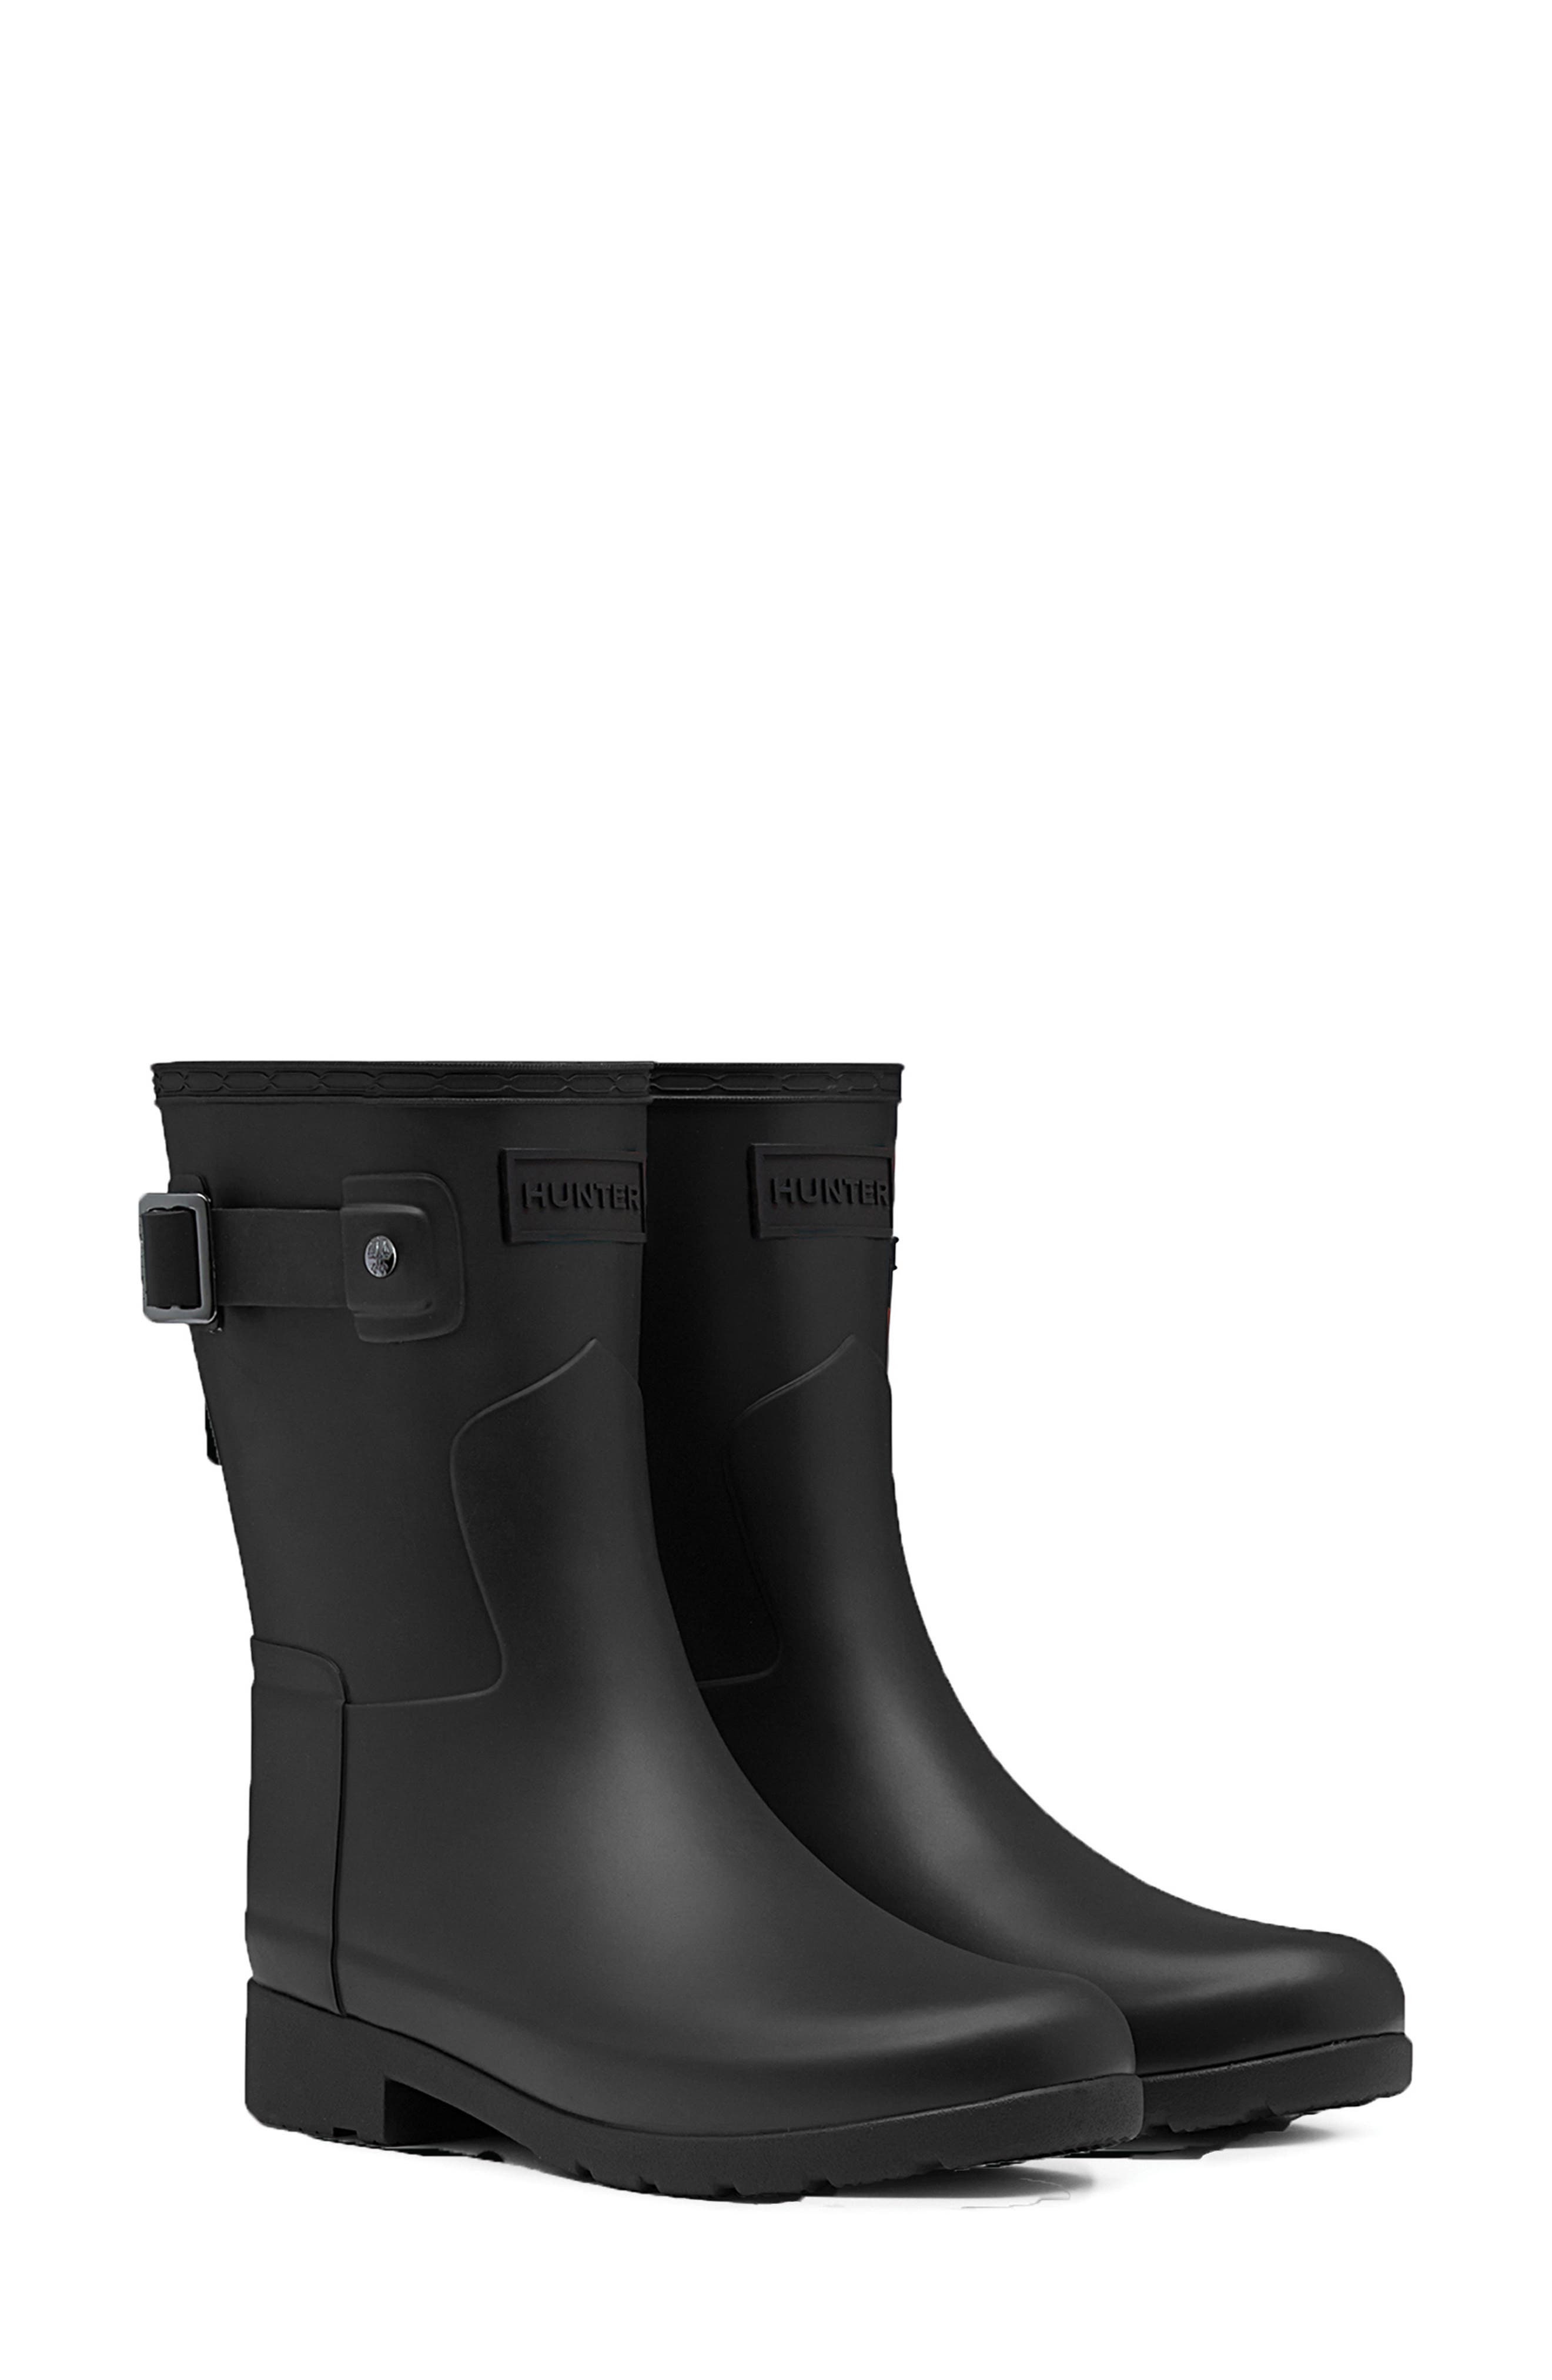 nordstrom rubber boots